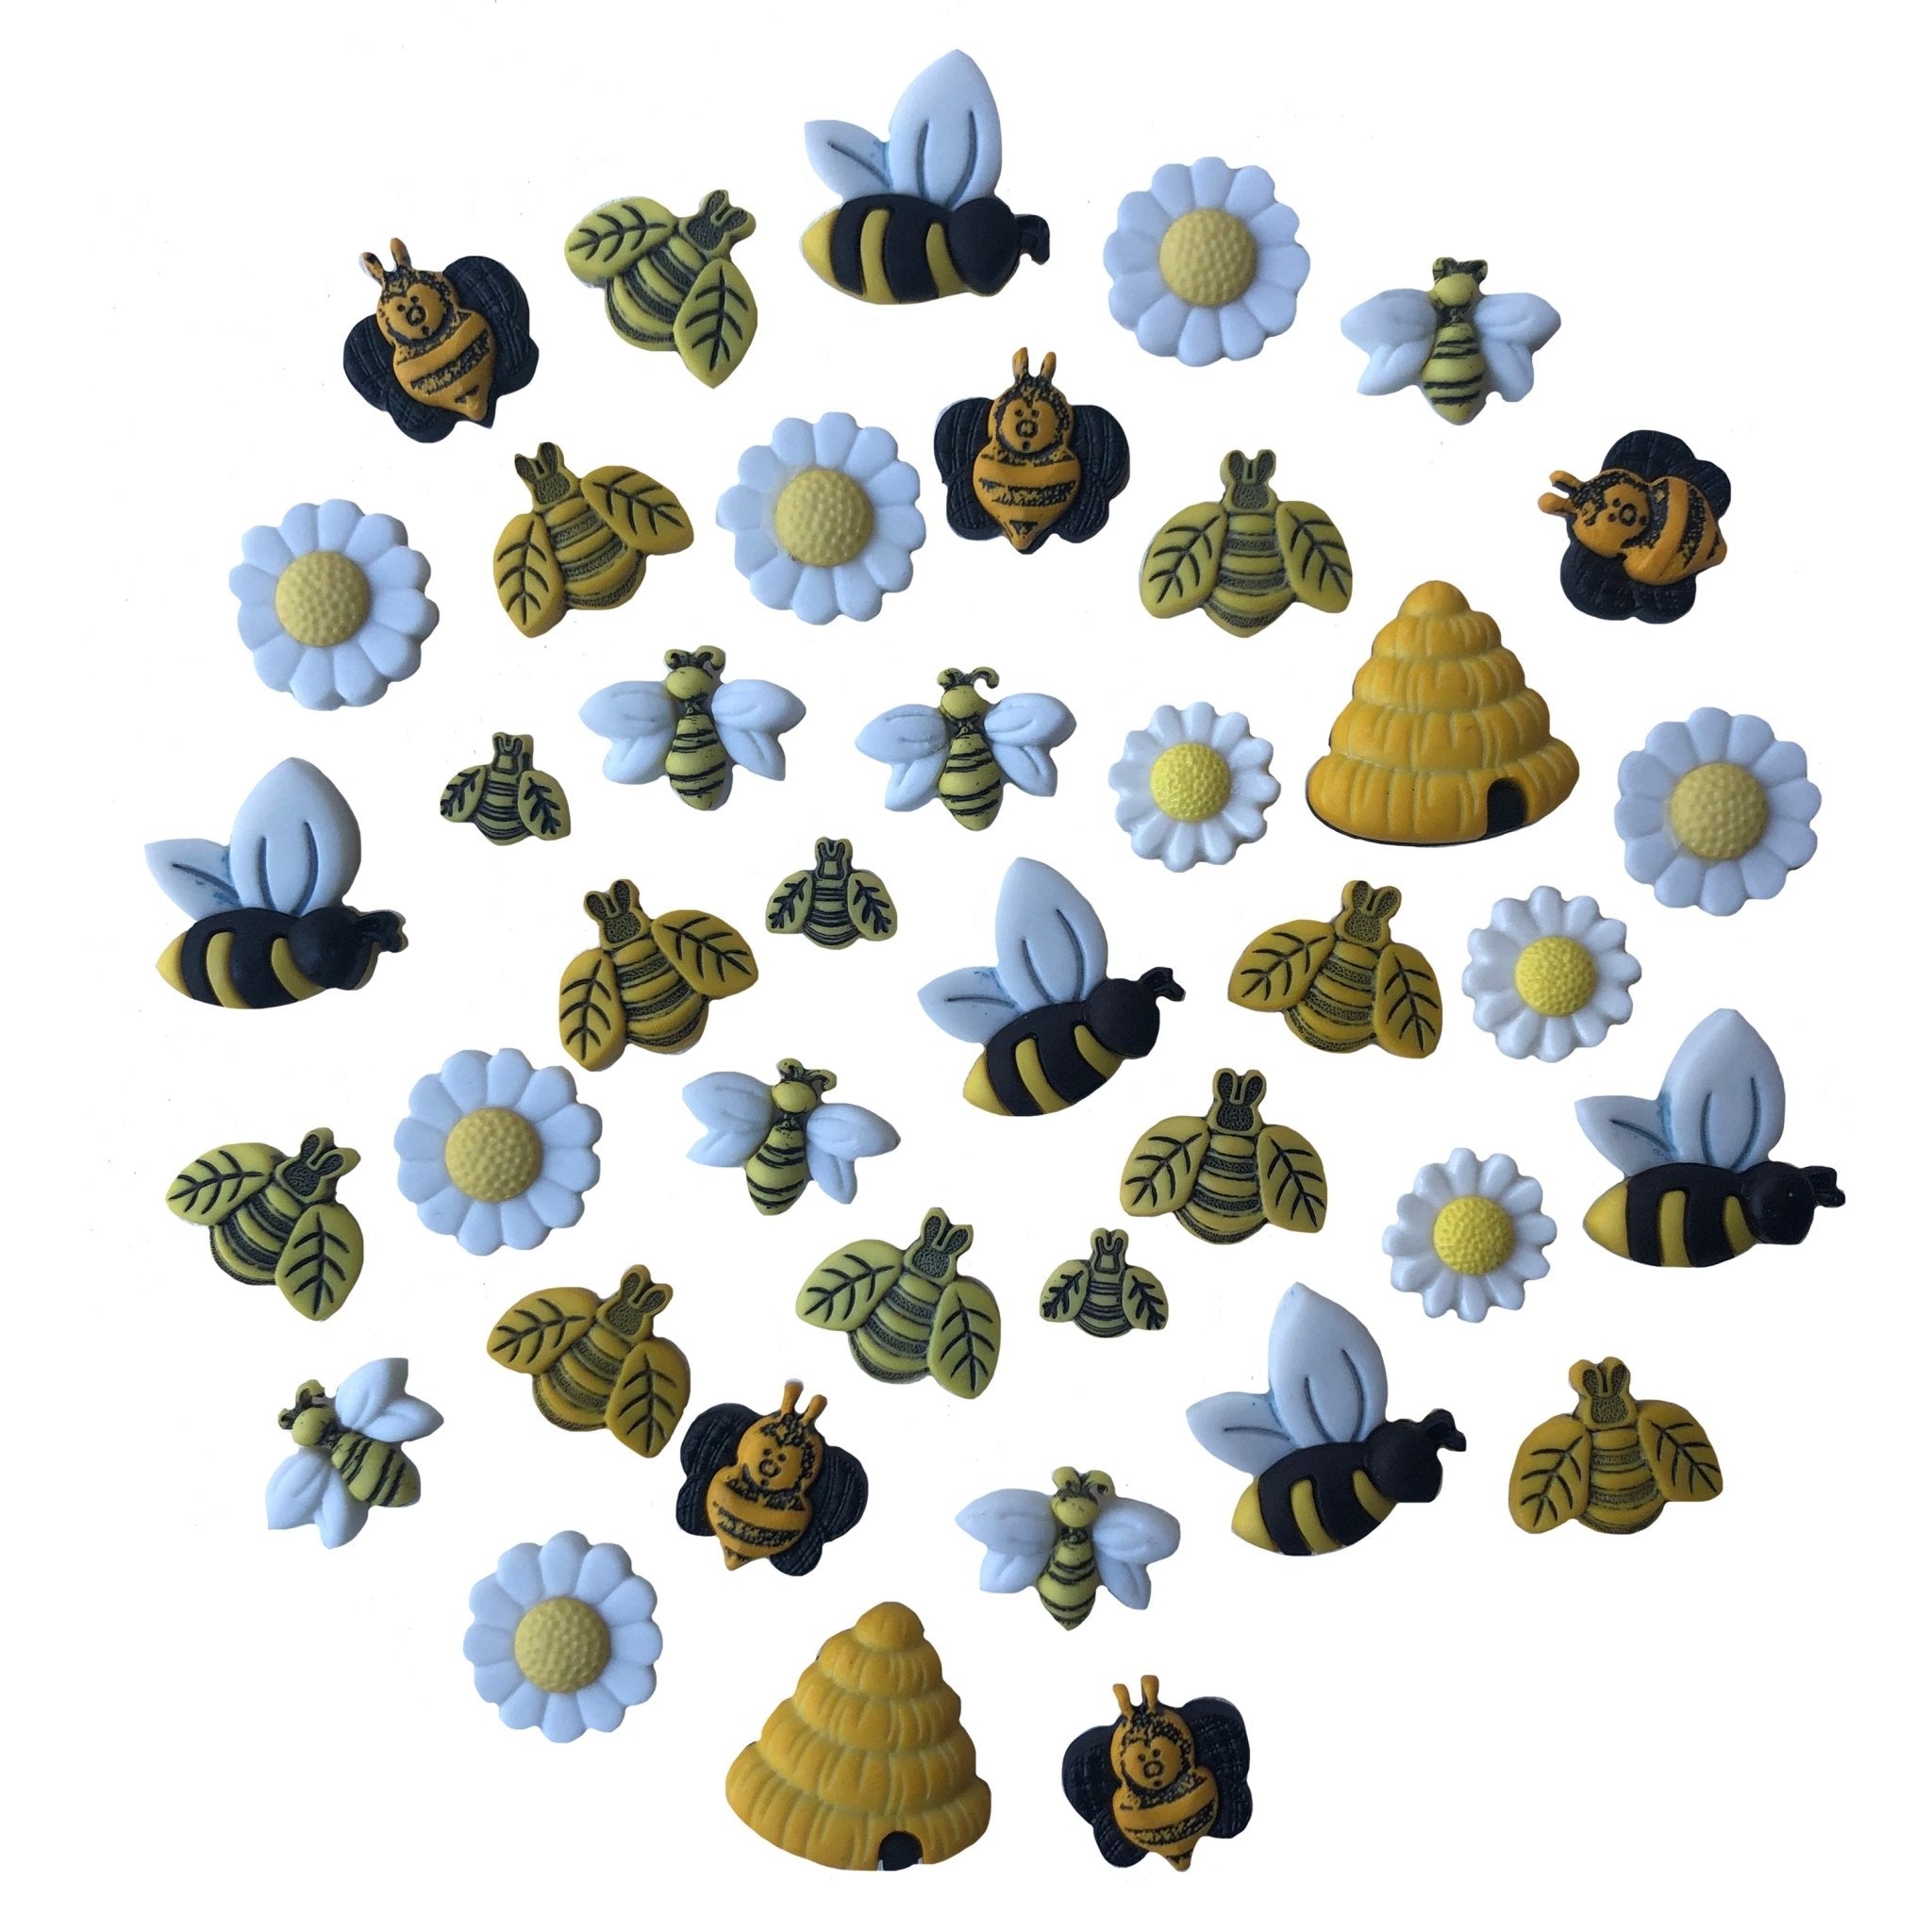 Bees Novelty Button Assortment - Buttons Galore and More